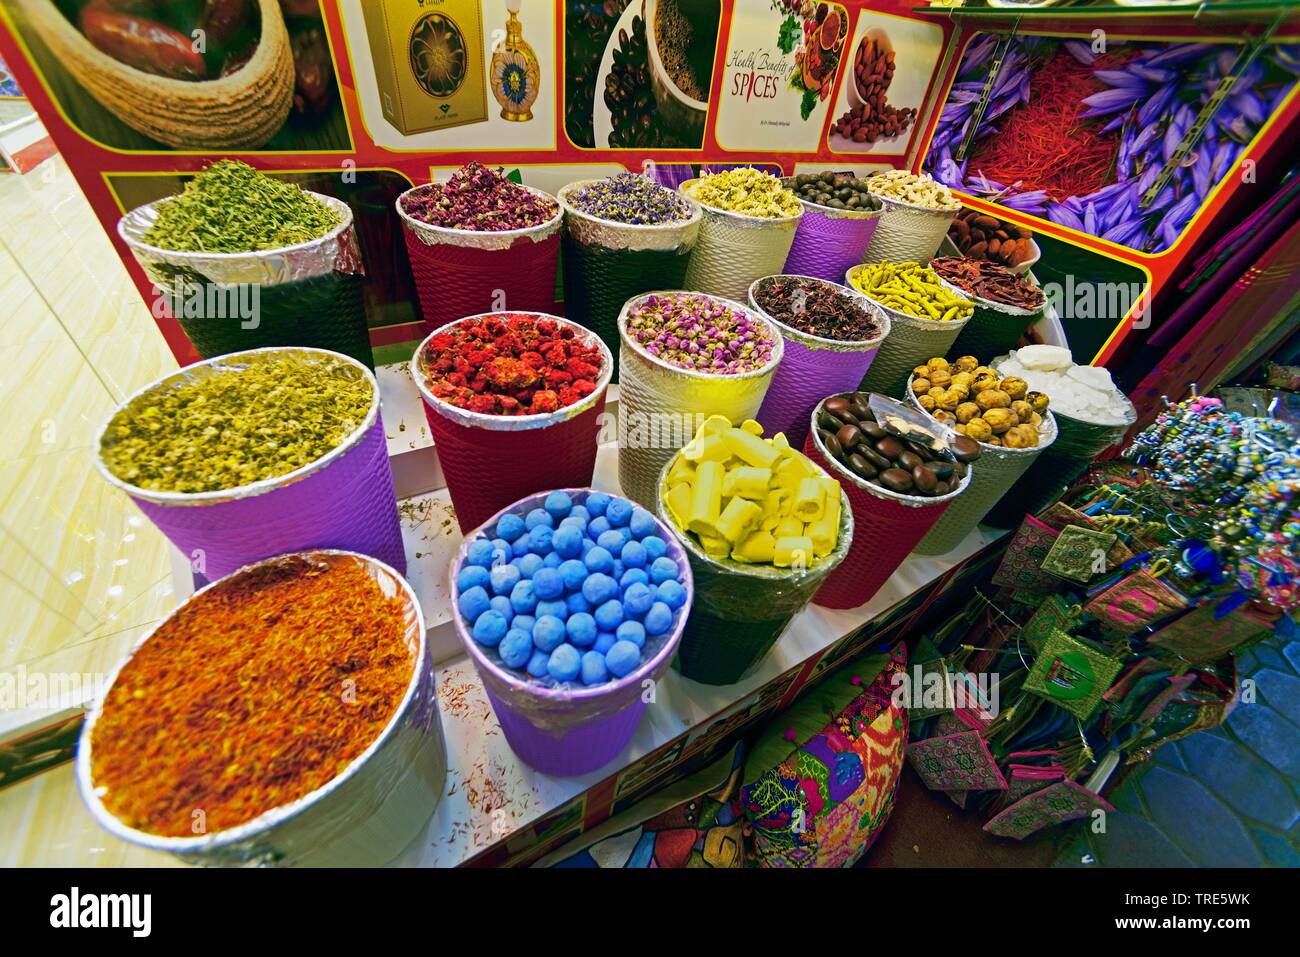 market stand with spices, soaps, incenses and seasonings, United Arab Emirates, Deira, Dubai Stock Photo